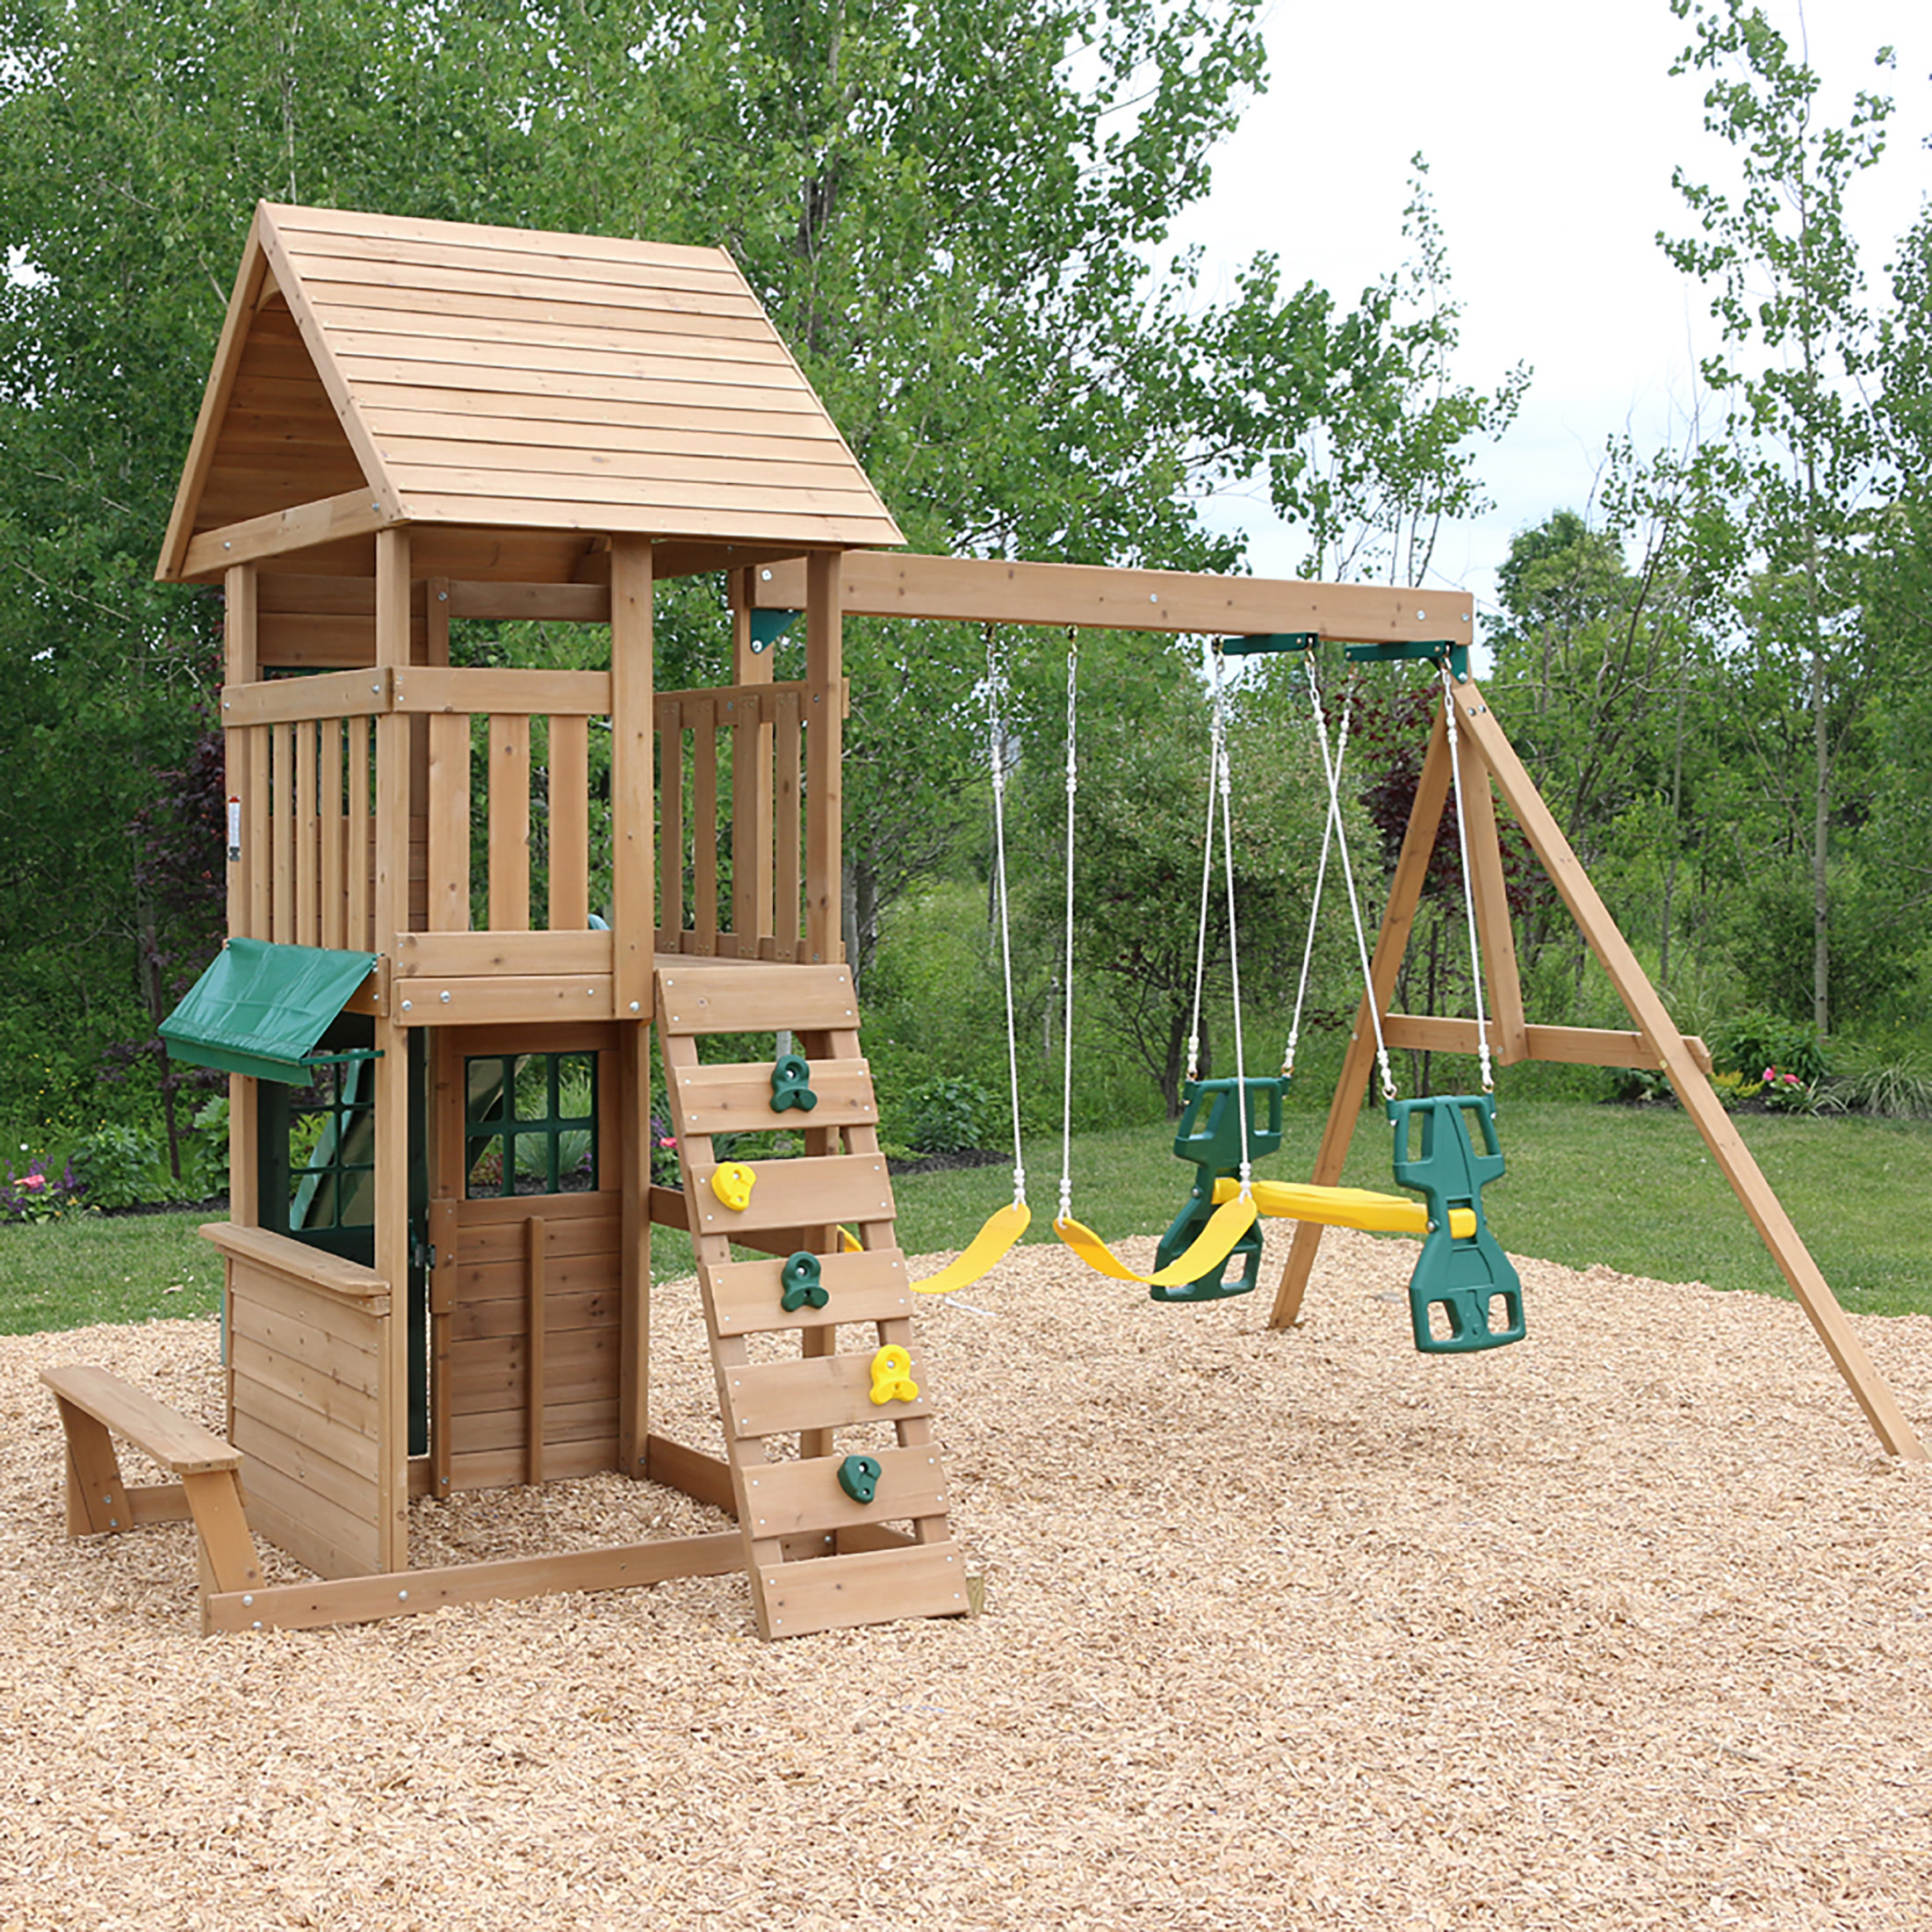 KidKraft Windale Wooden Swing Set / Playset with Clubhouse, Swings, Slide, Shaded Table and Bench - image 4 of 12